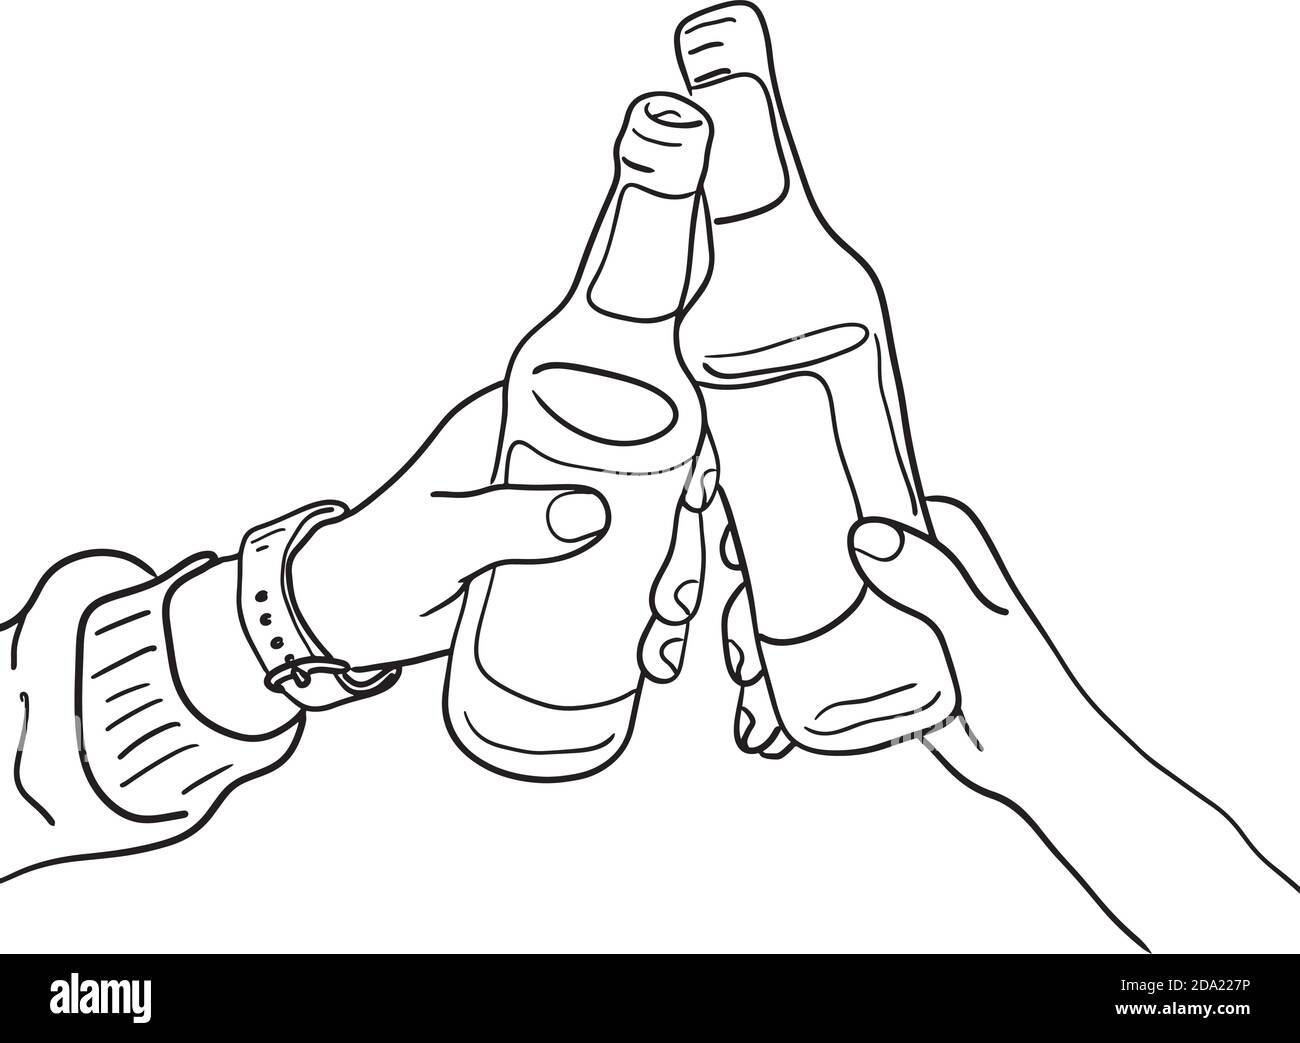 hand of two person toasting bottle of beer vector illustration sketch doodle hand drawn with black lines isolated on white background Stock Vector